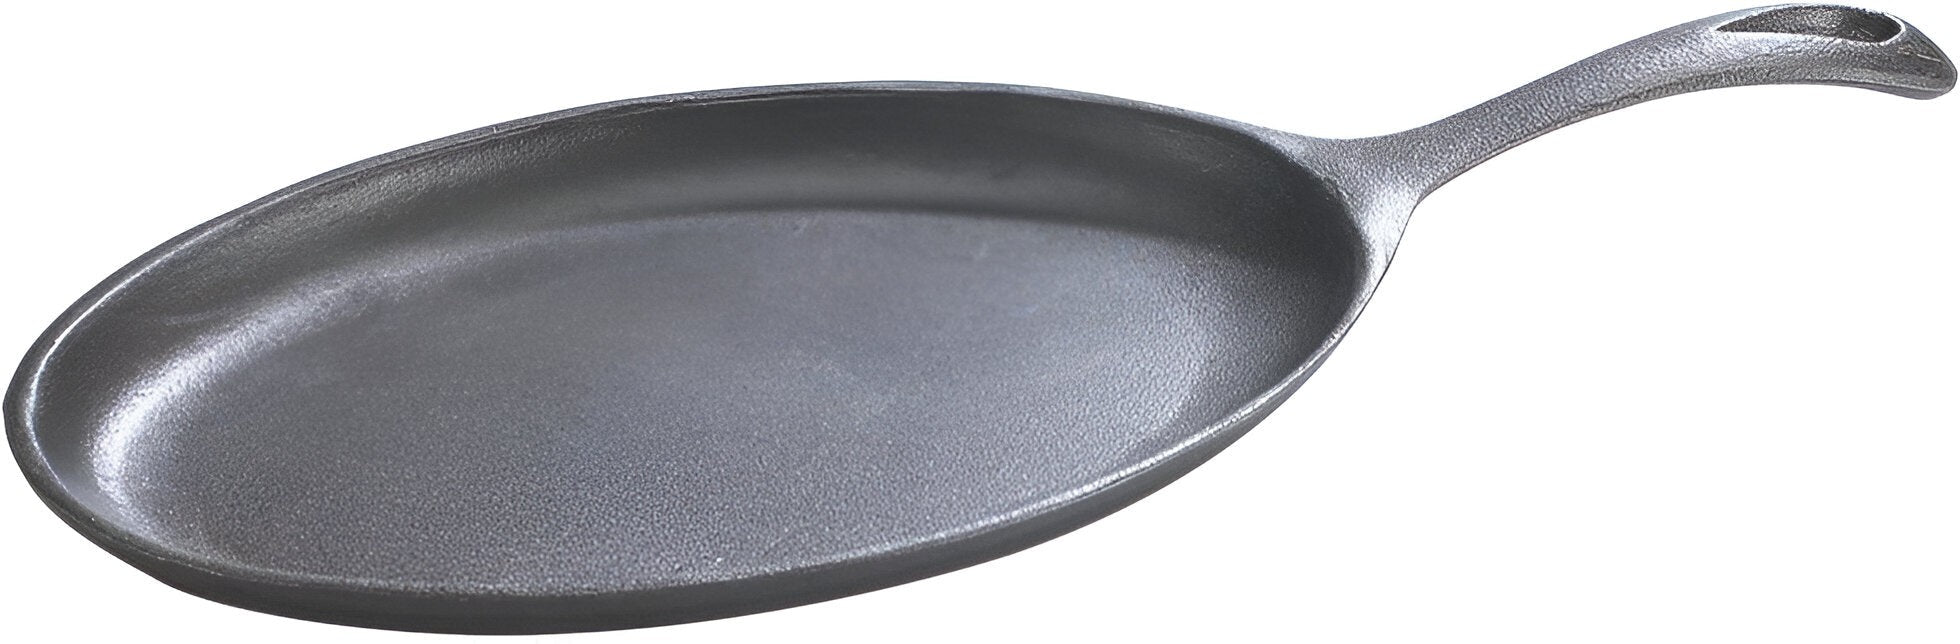 Browne - 14.5" x 7" Cast Iron Oval Fry Pan - 573722